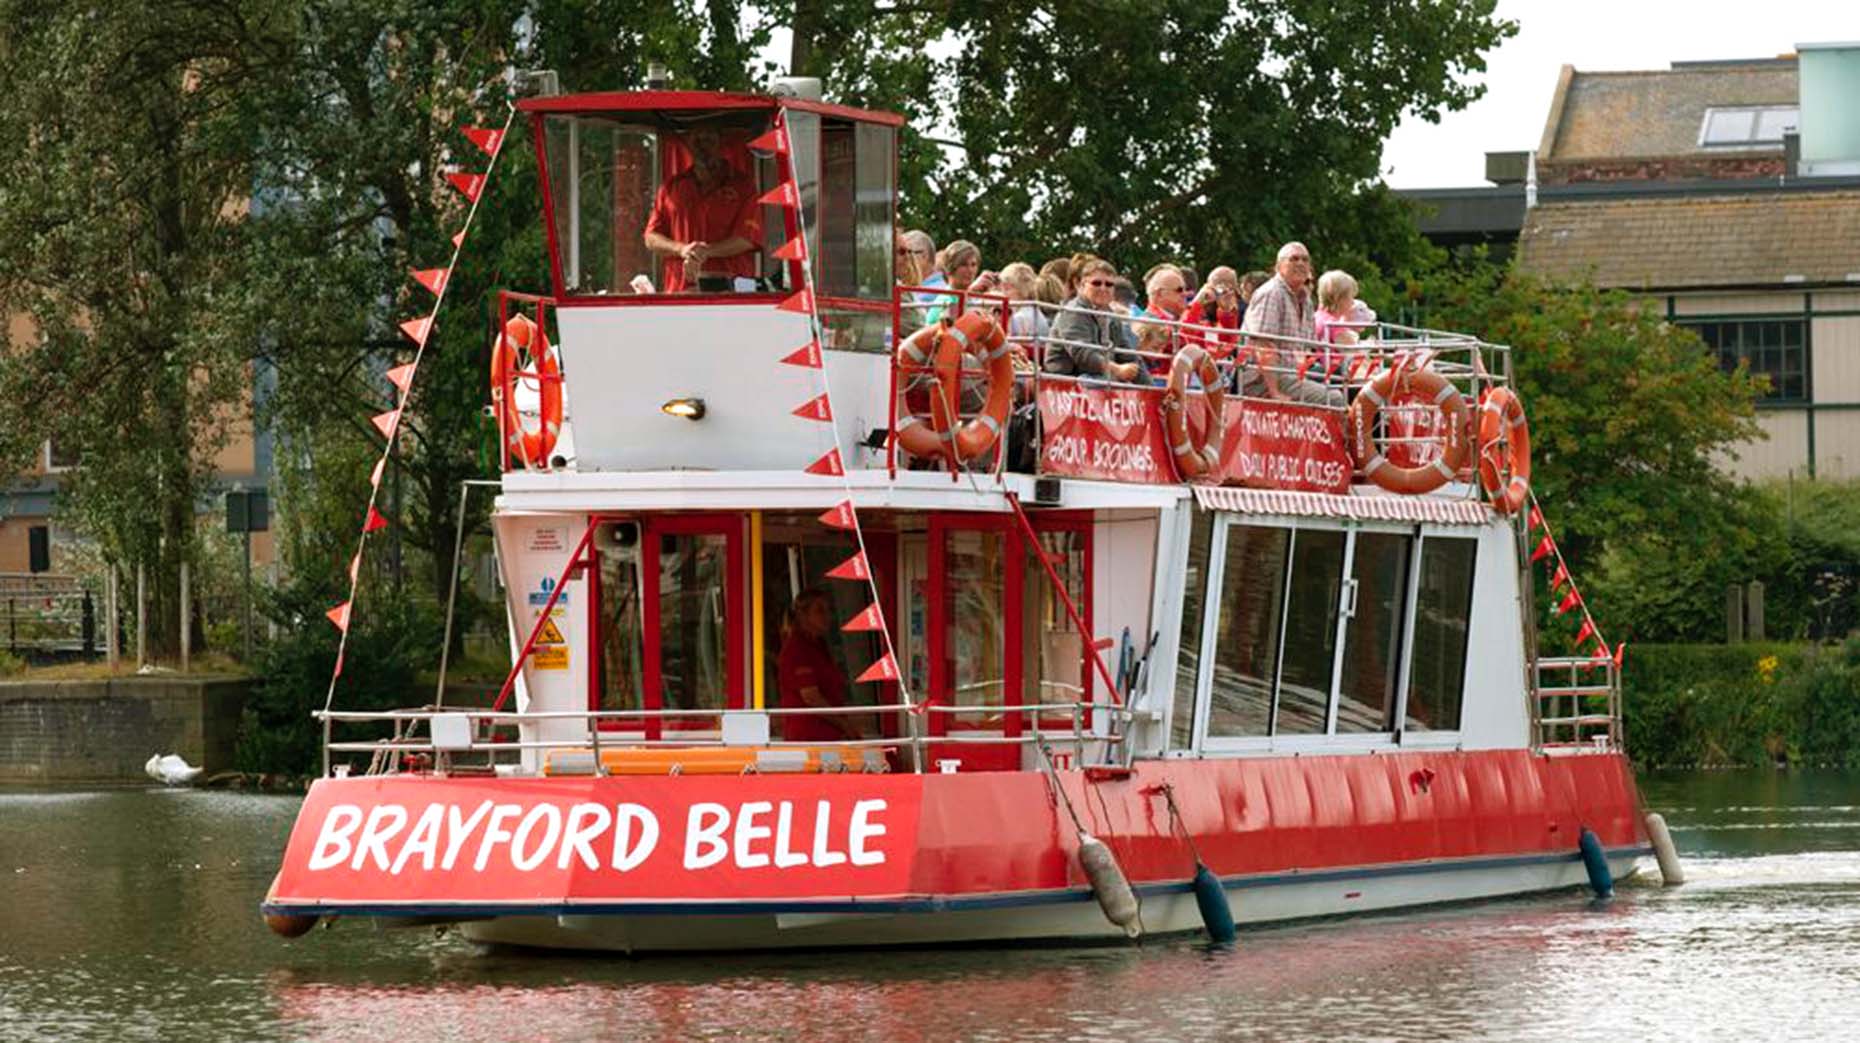 The Brayford Belle sets sail from the Brayford Pool in Lincoln for five waterway tours per day.